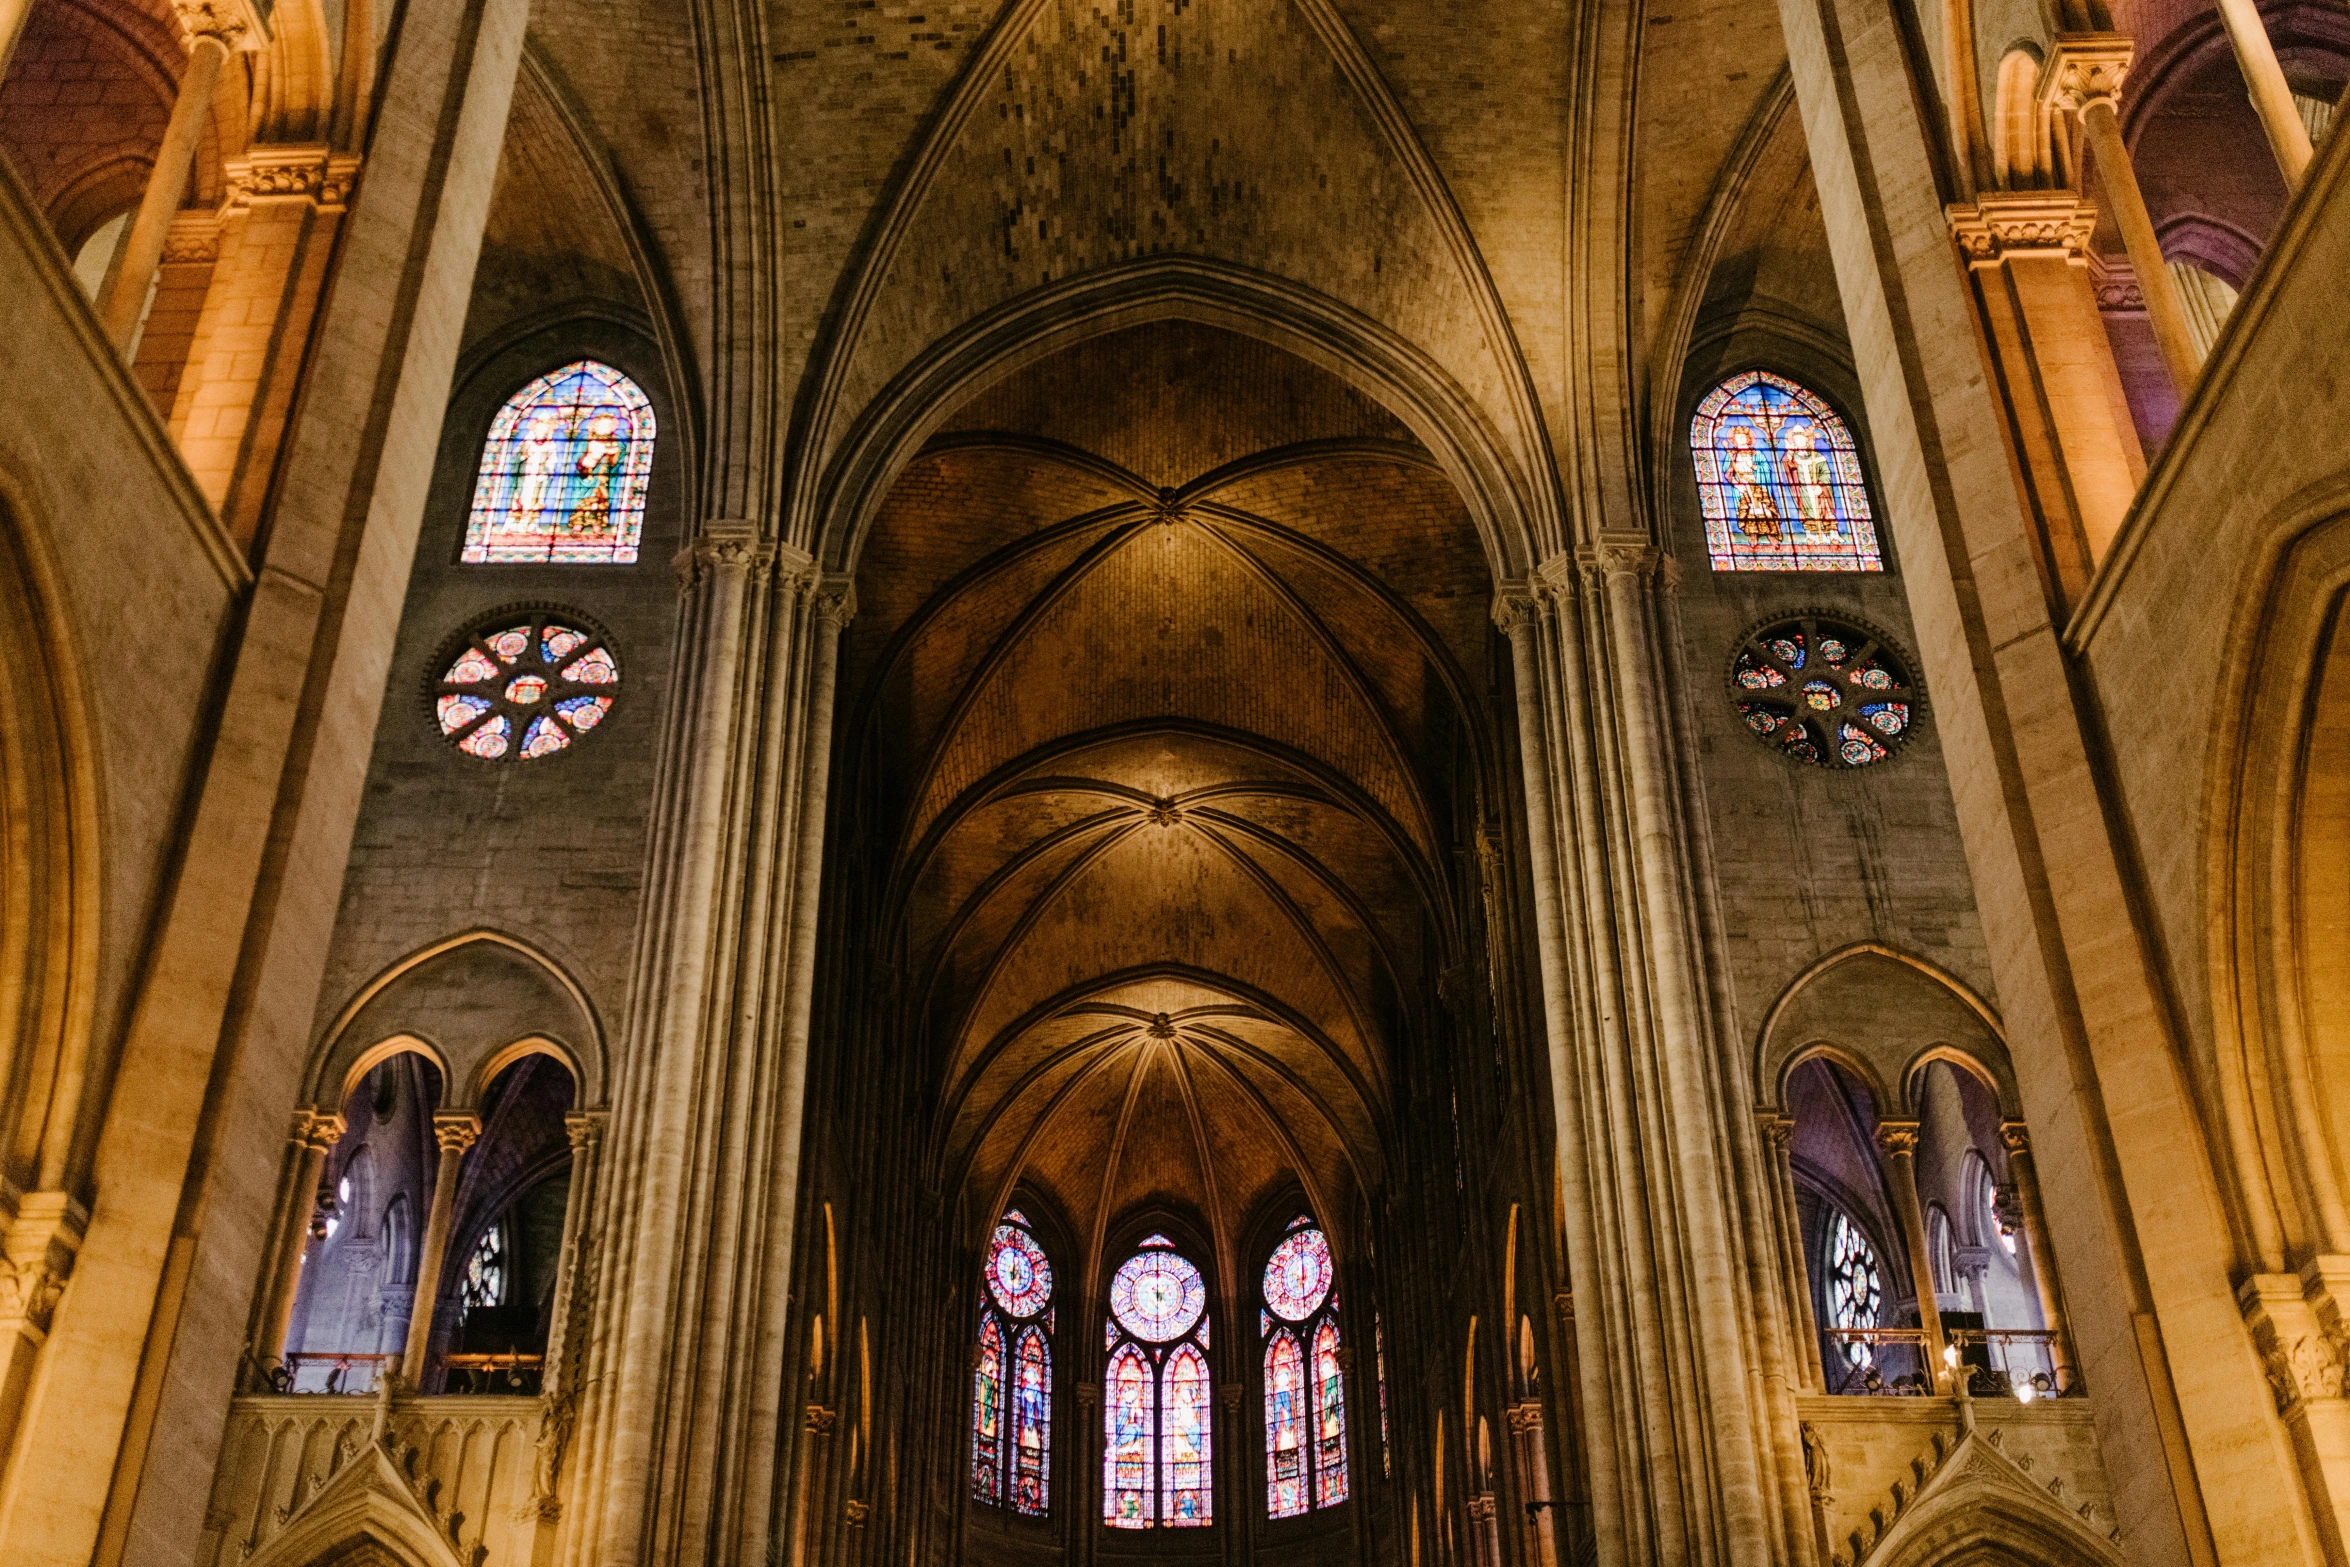 the interior of a cathedral with stained glass windows, an album cover, pexels contest winner, ornate french architecture, buttresses, wide high angle view, youtube thumbnail